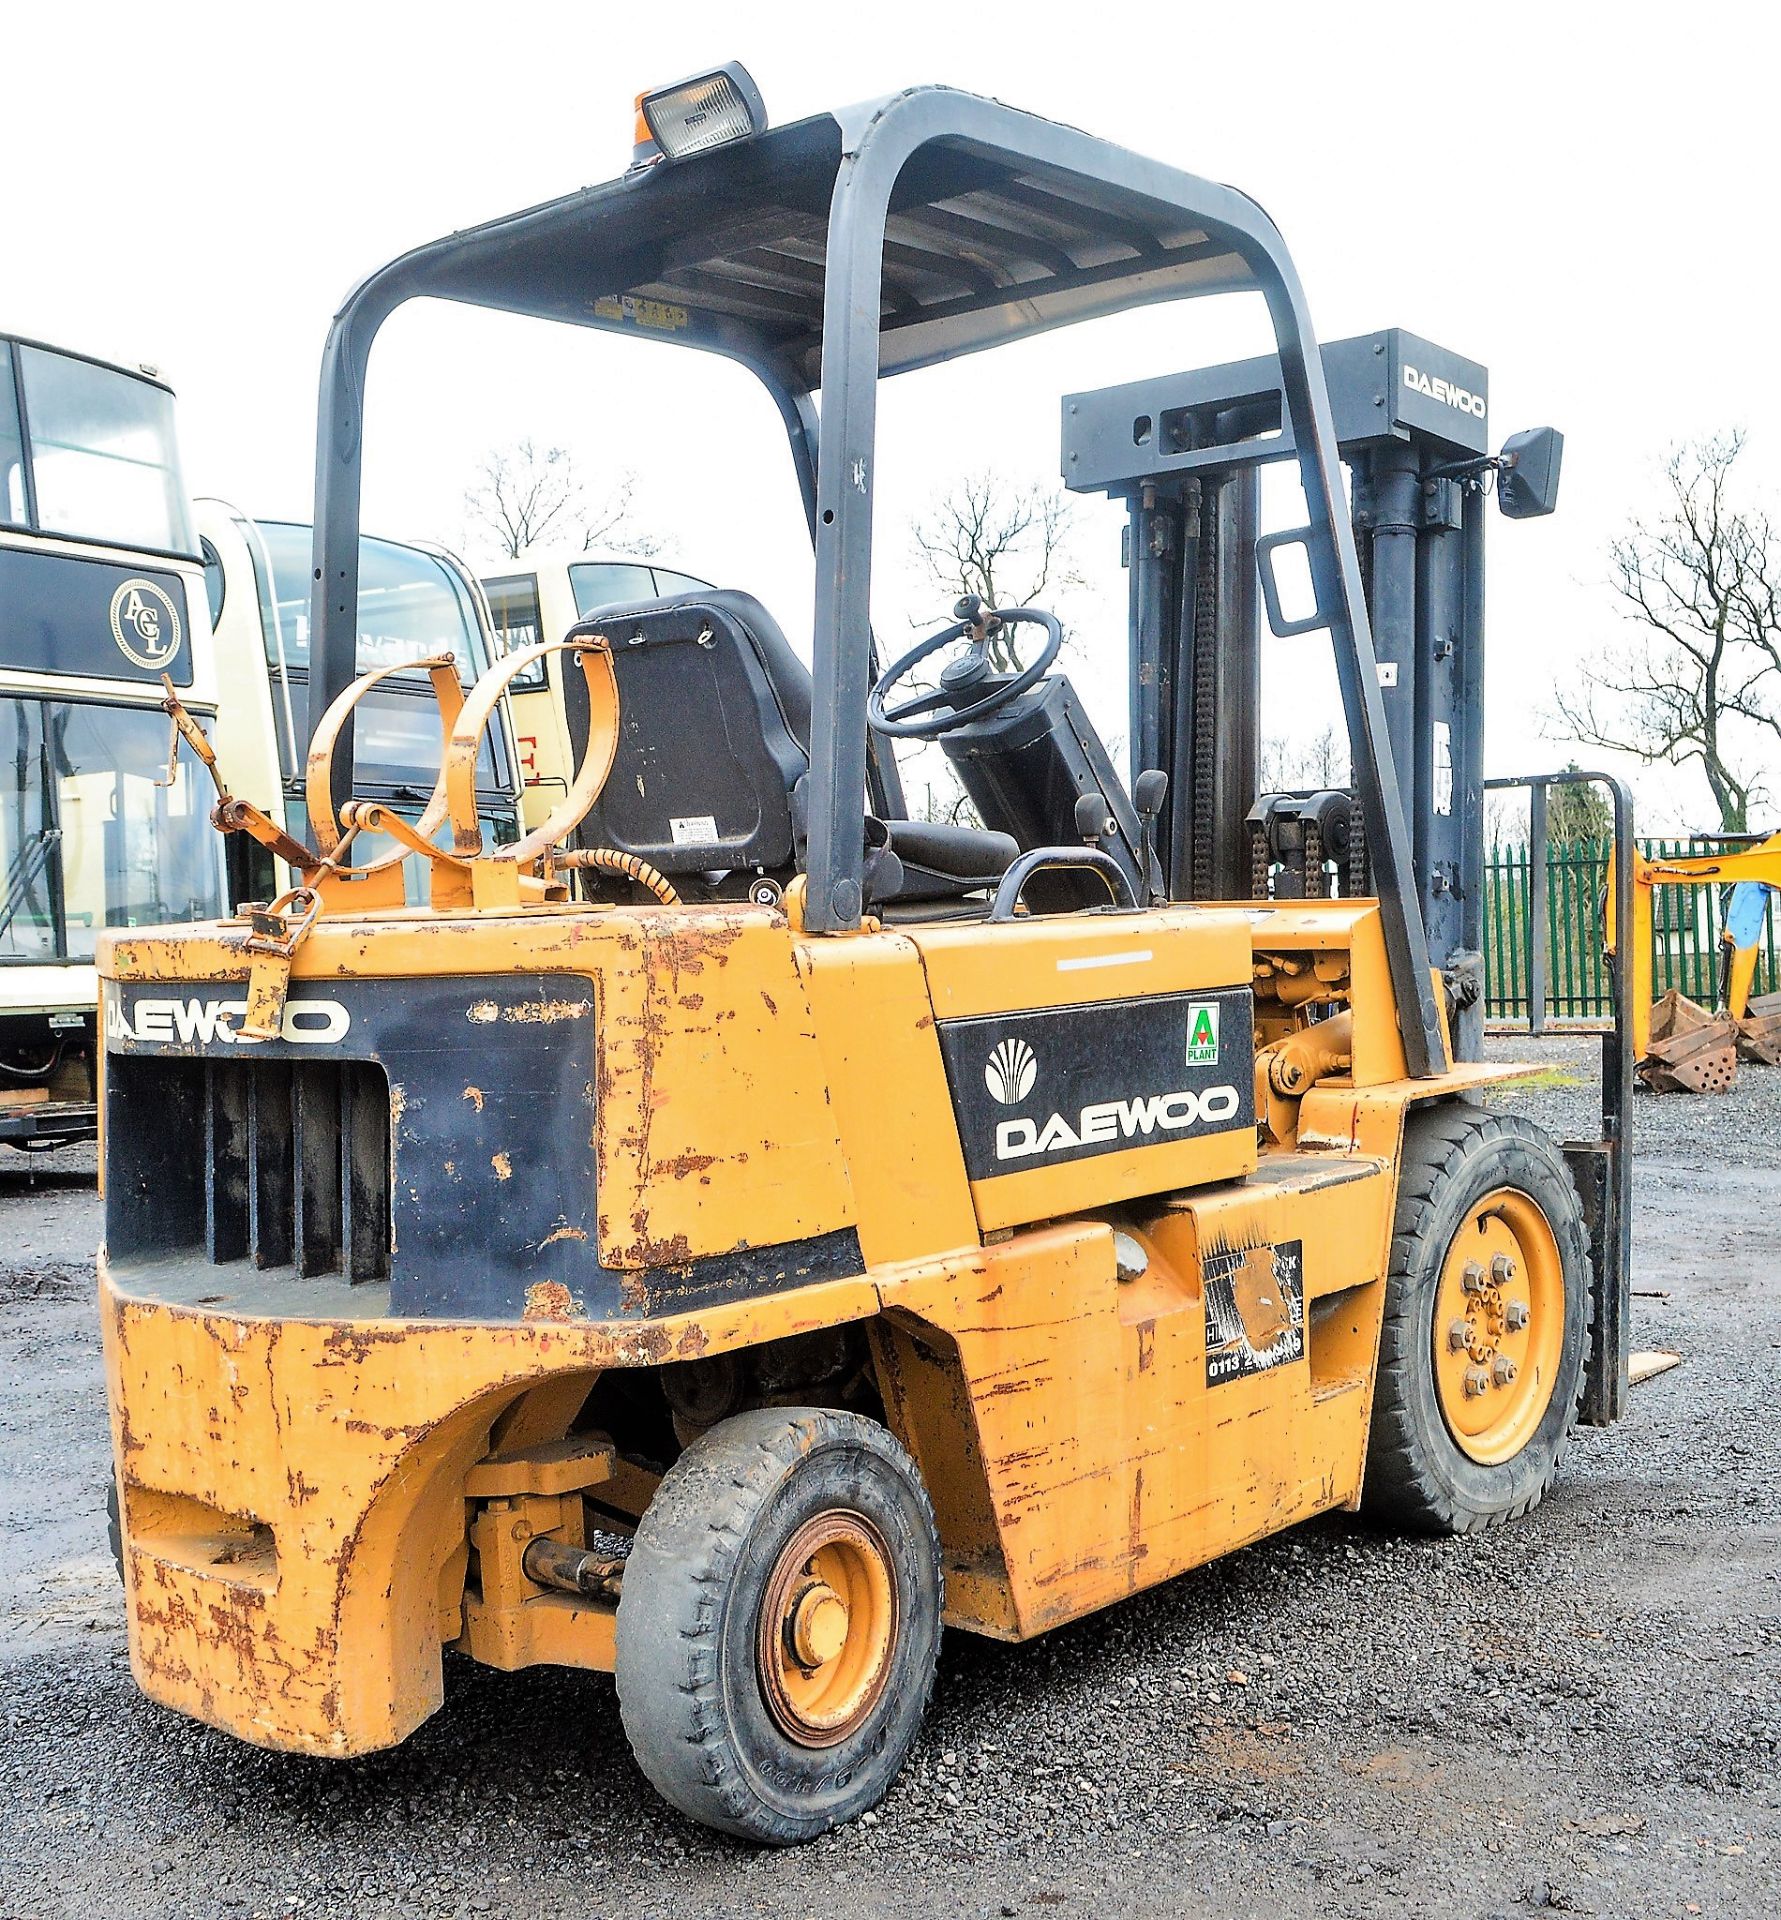 Daewoo G25F 2.5 tonne gas powered fork lift truck S/N: 003455 Recorded Hours: Not displayed (Clock - Image 4 of 8